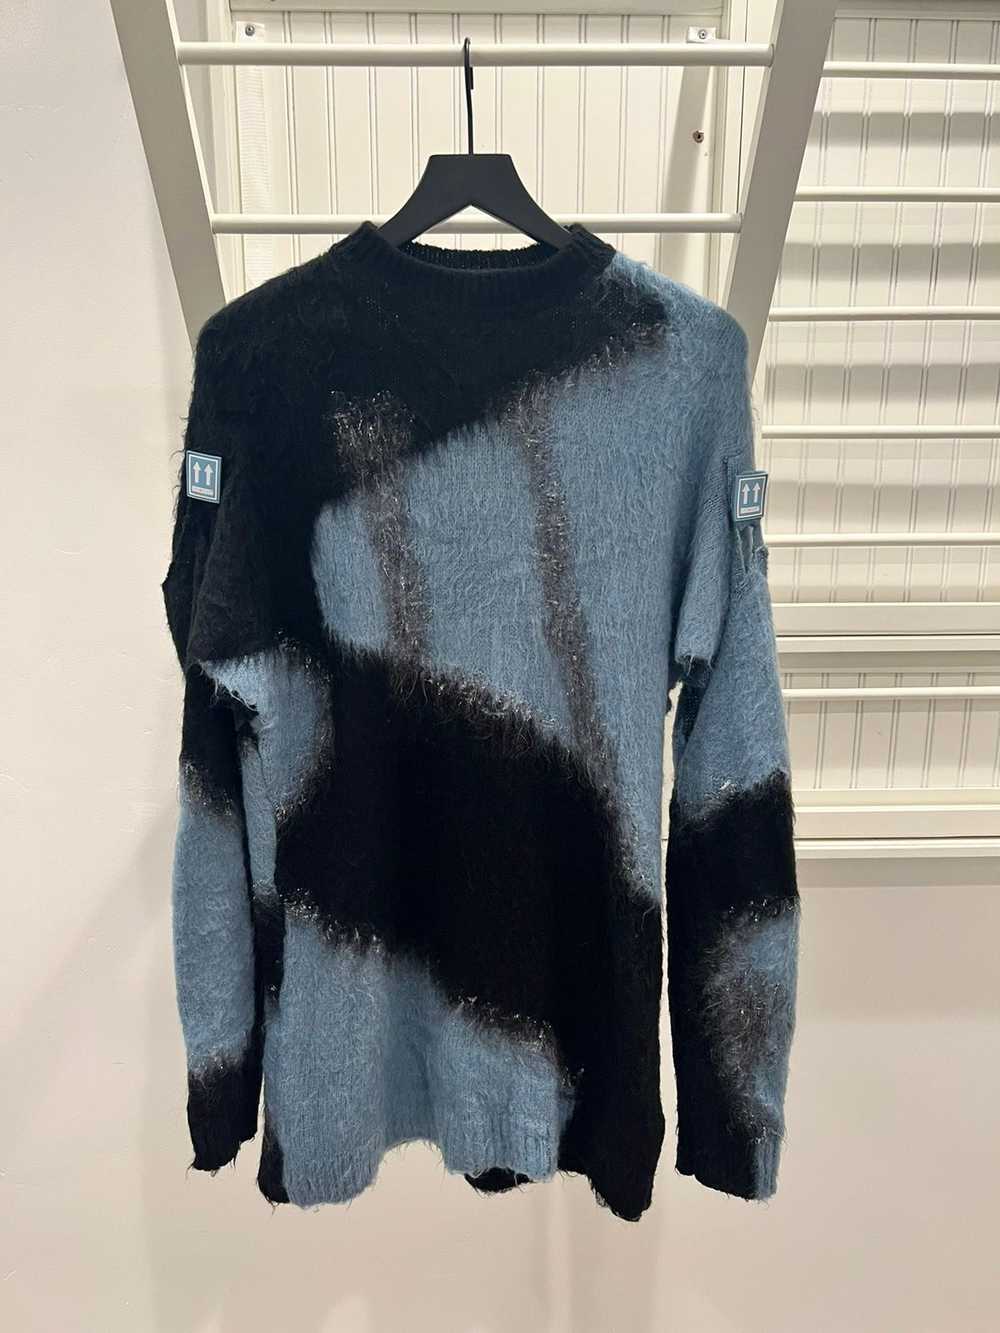 Off-White Off White Fuzzy Knitwear Sweater - image 1